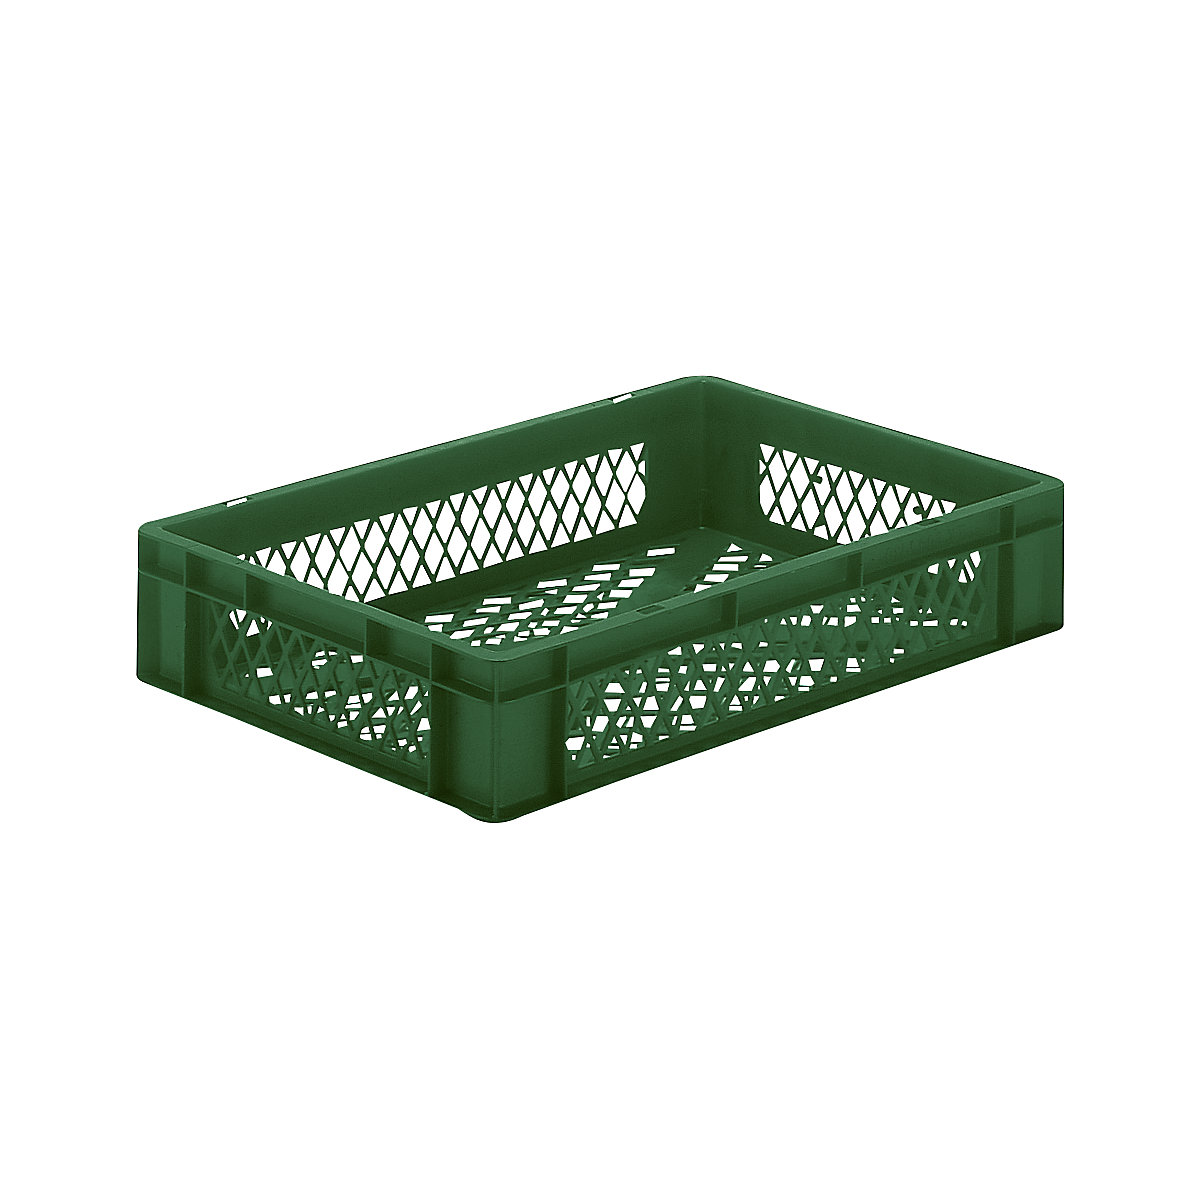 Euro stacking container, perforated walls and base, LxWxH 600 x 400 x 120 mm, green, pack of 5-7